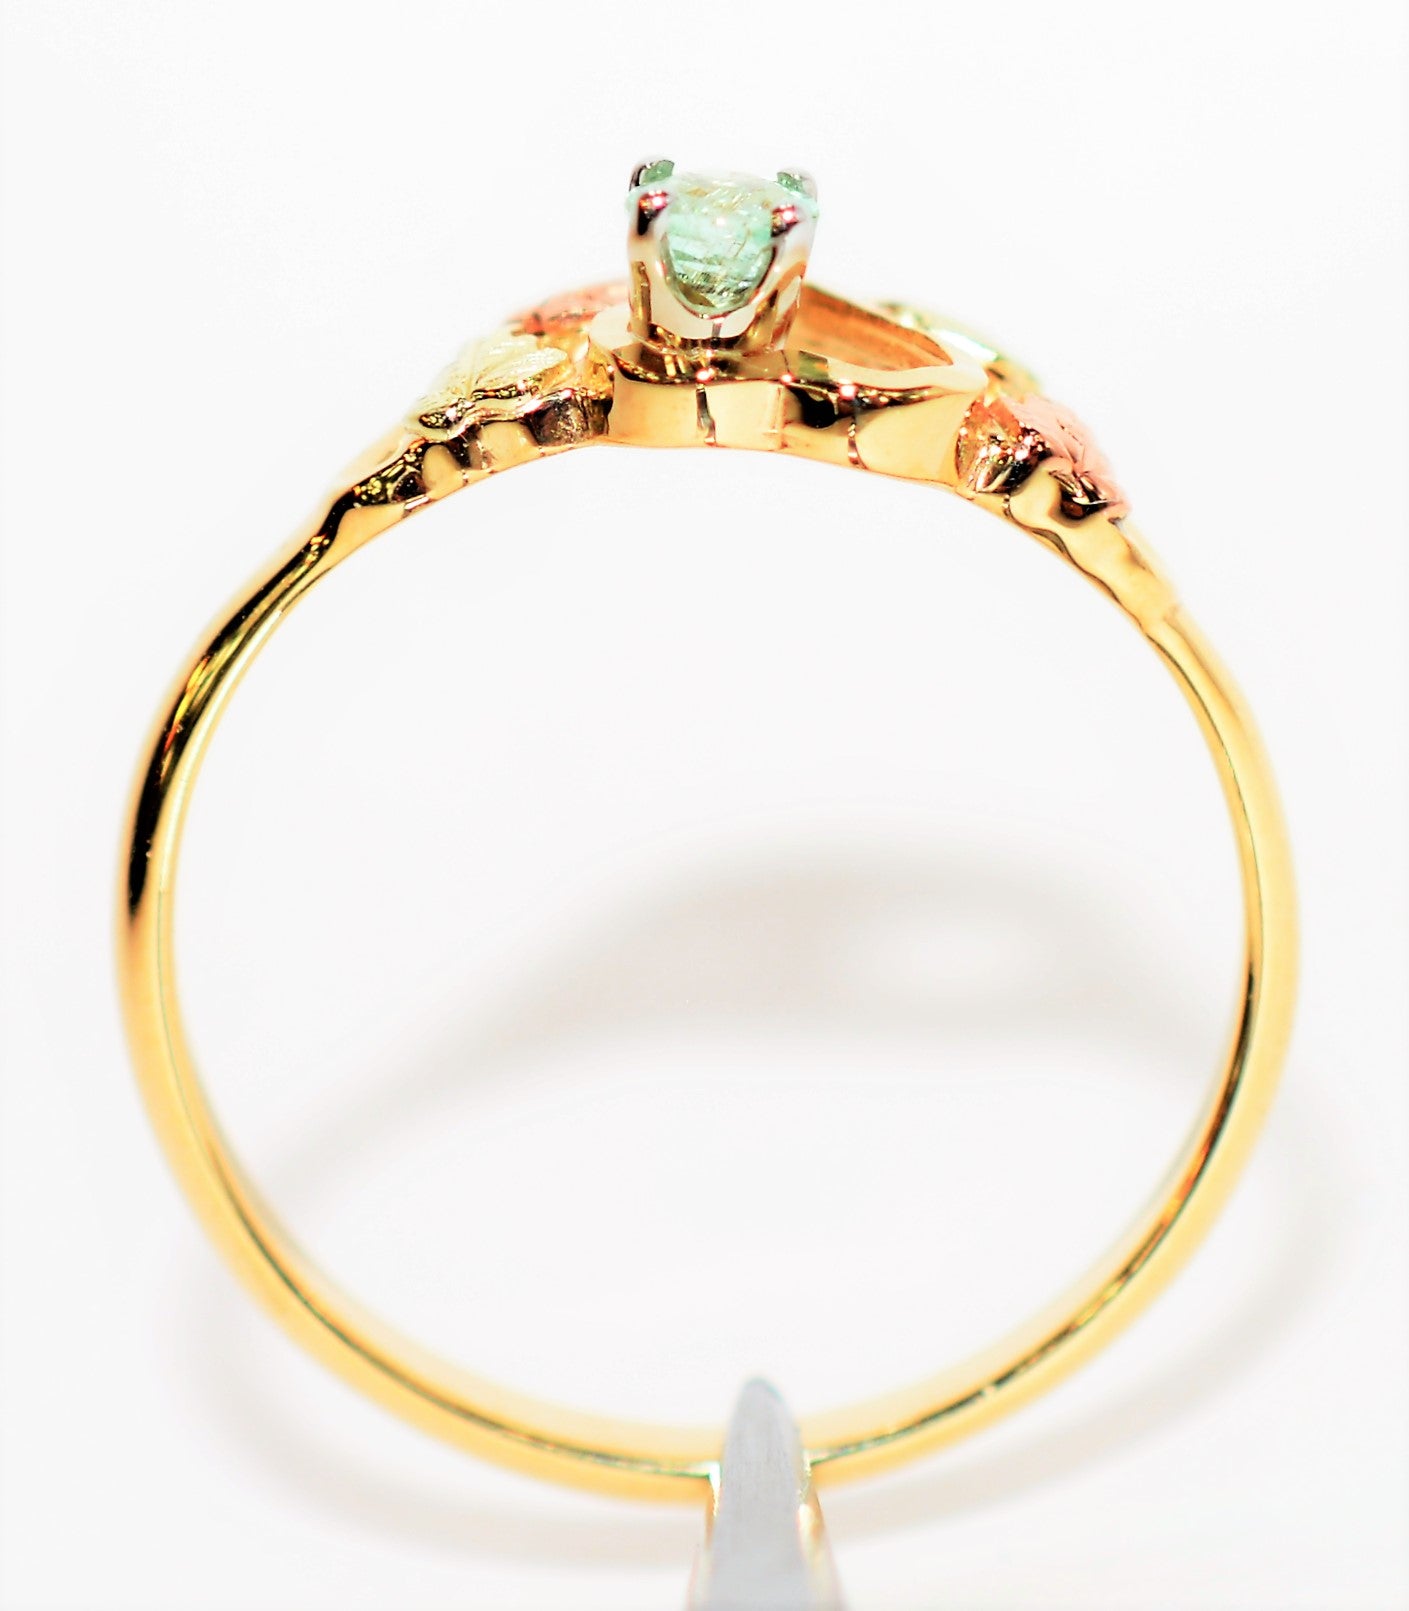 Natural Paraiba Tourmaline Ring 10K Solid Gold Black Hills Gold .15ct Heart Ring Gemstone Ring Solitaire Ring Ladies Ring Fine Jewelry